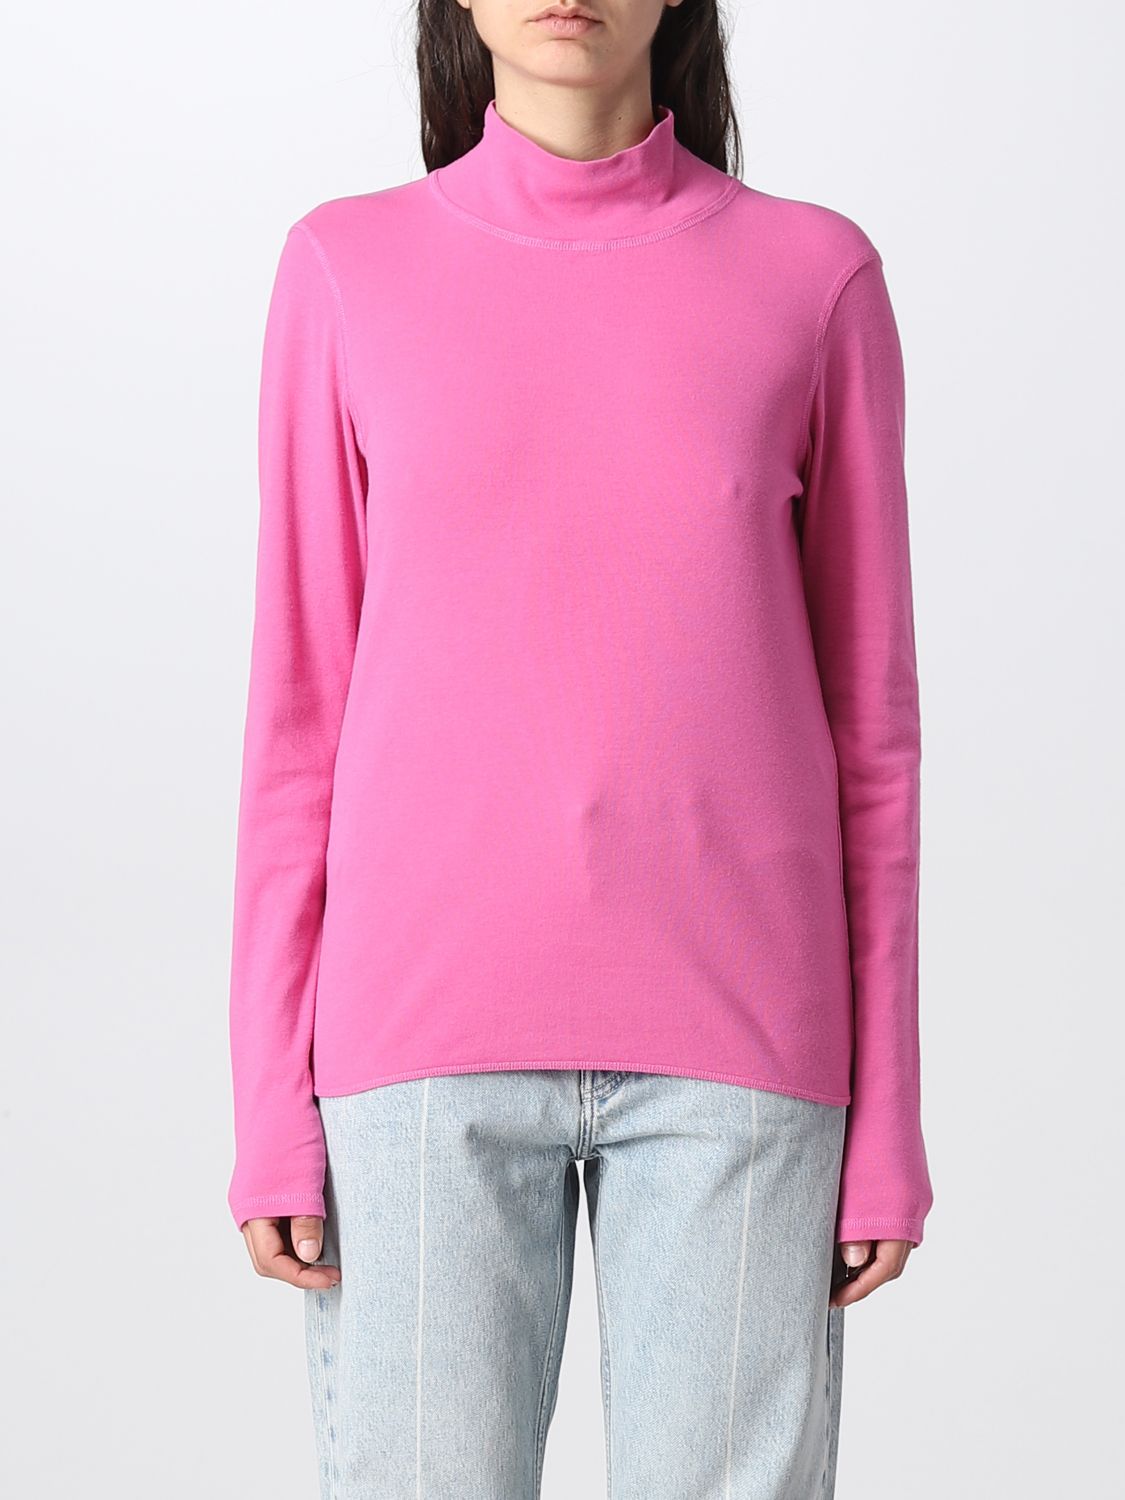 Top Our Legacy: Our Legacy top for woman pink 1